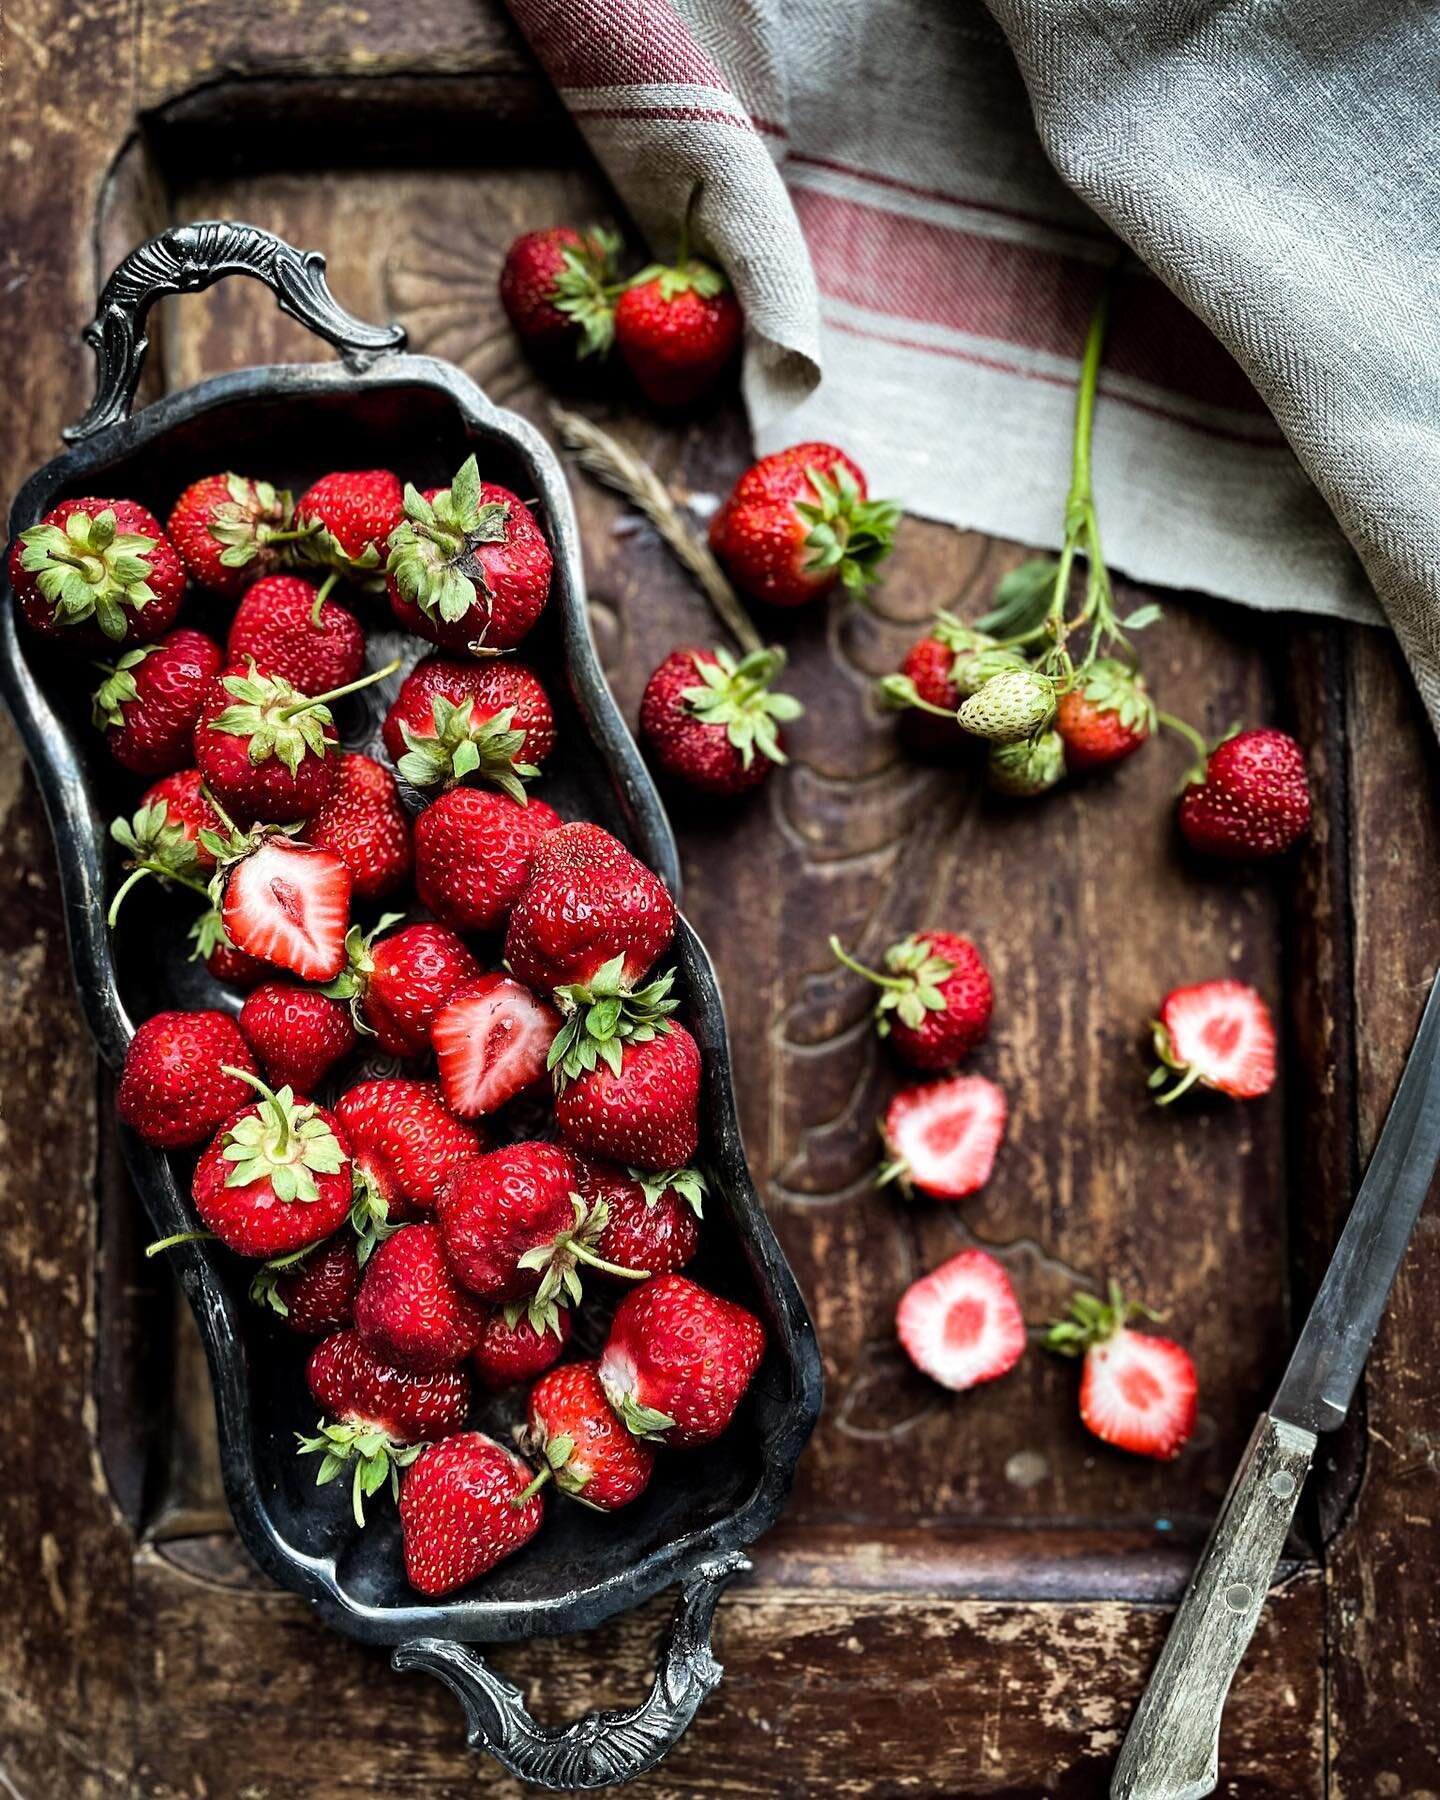 🍓 S T R A W B E R R I E S 🍓

Well, what else would I post today!! 😄 I thought I was beating the heat by booking an early-ish morning slot but I learn no one can beat nature. Lol. A half hour in the field, some red faces (heat and all the strawberr